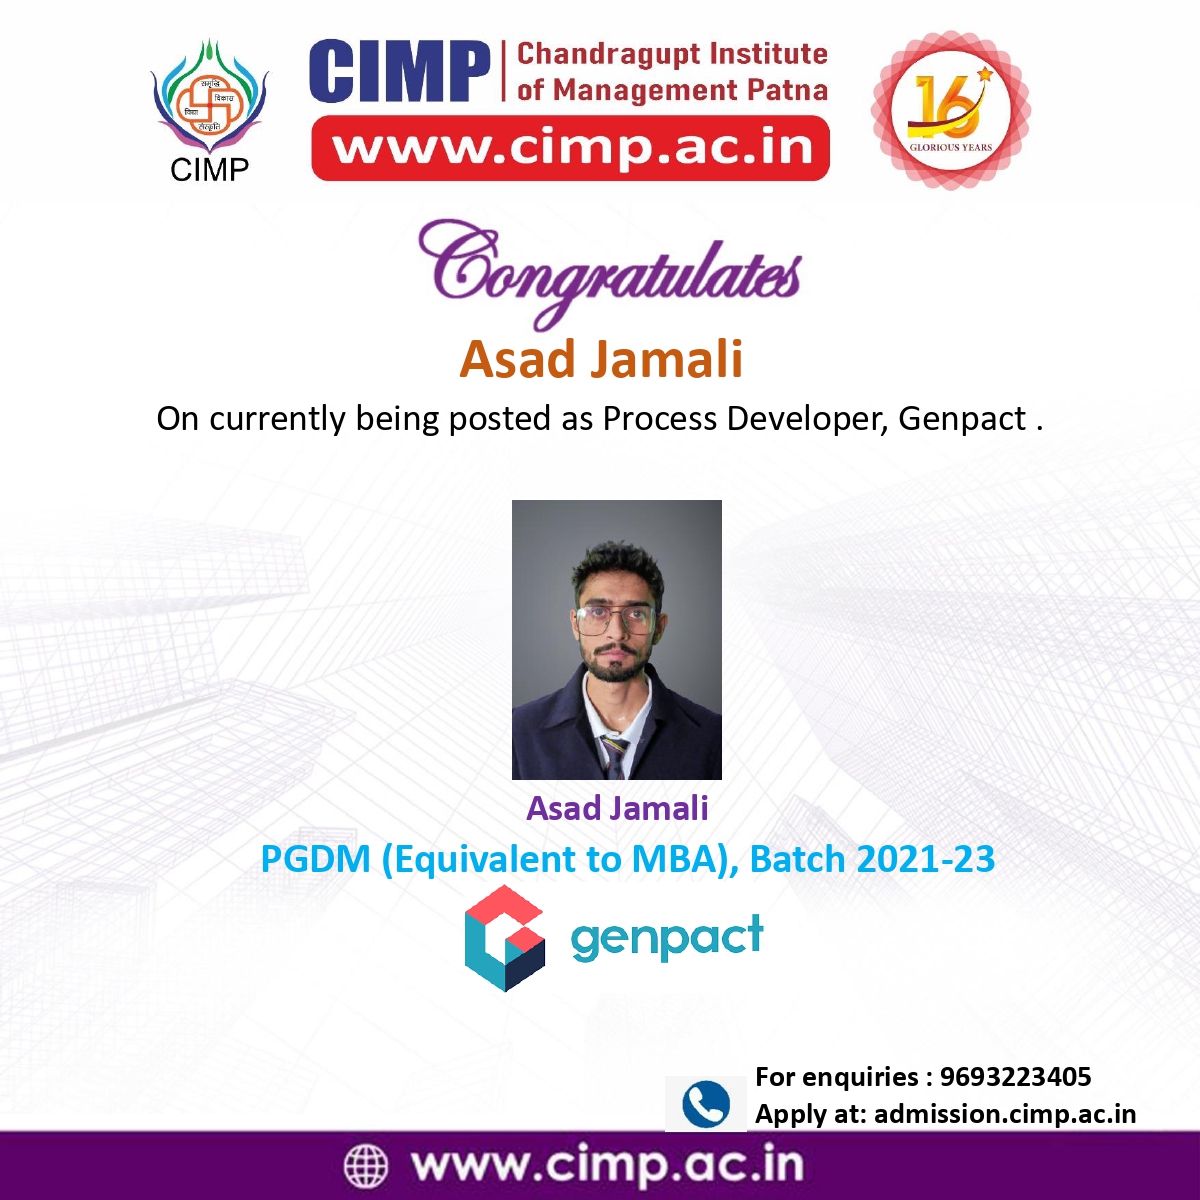 cimp.ac.in
CIMP Congratulates Mr. Asad  Jamali  on currently being posted as Process Developer, Genpact.